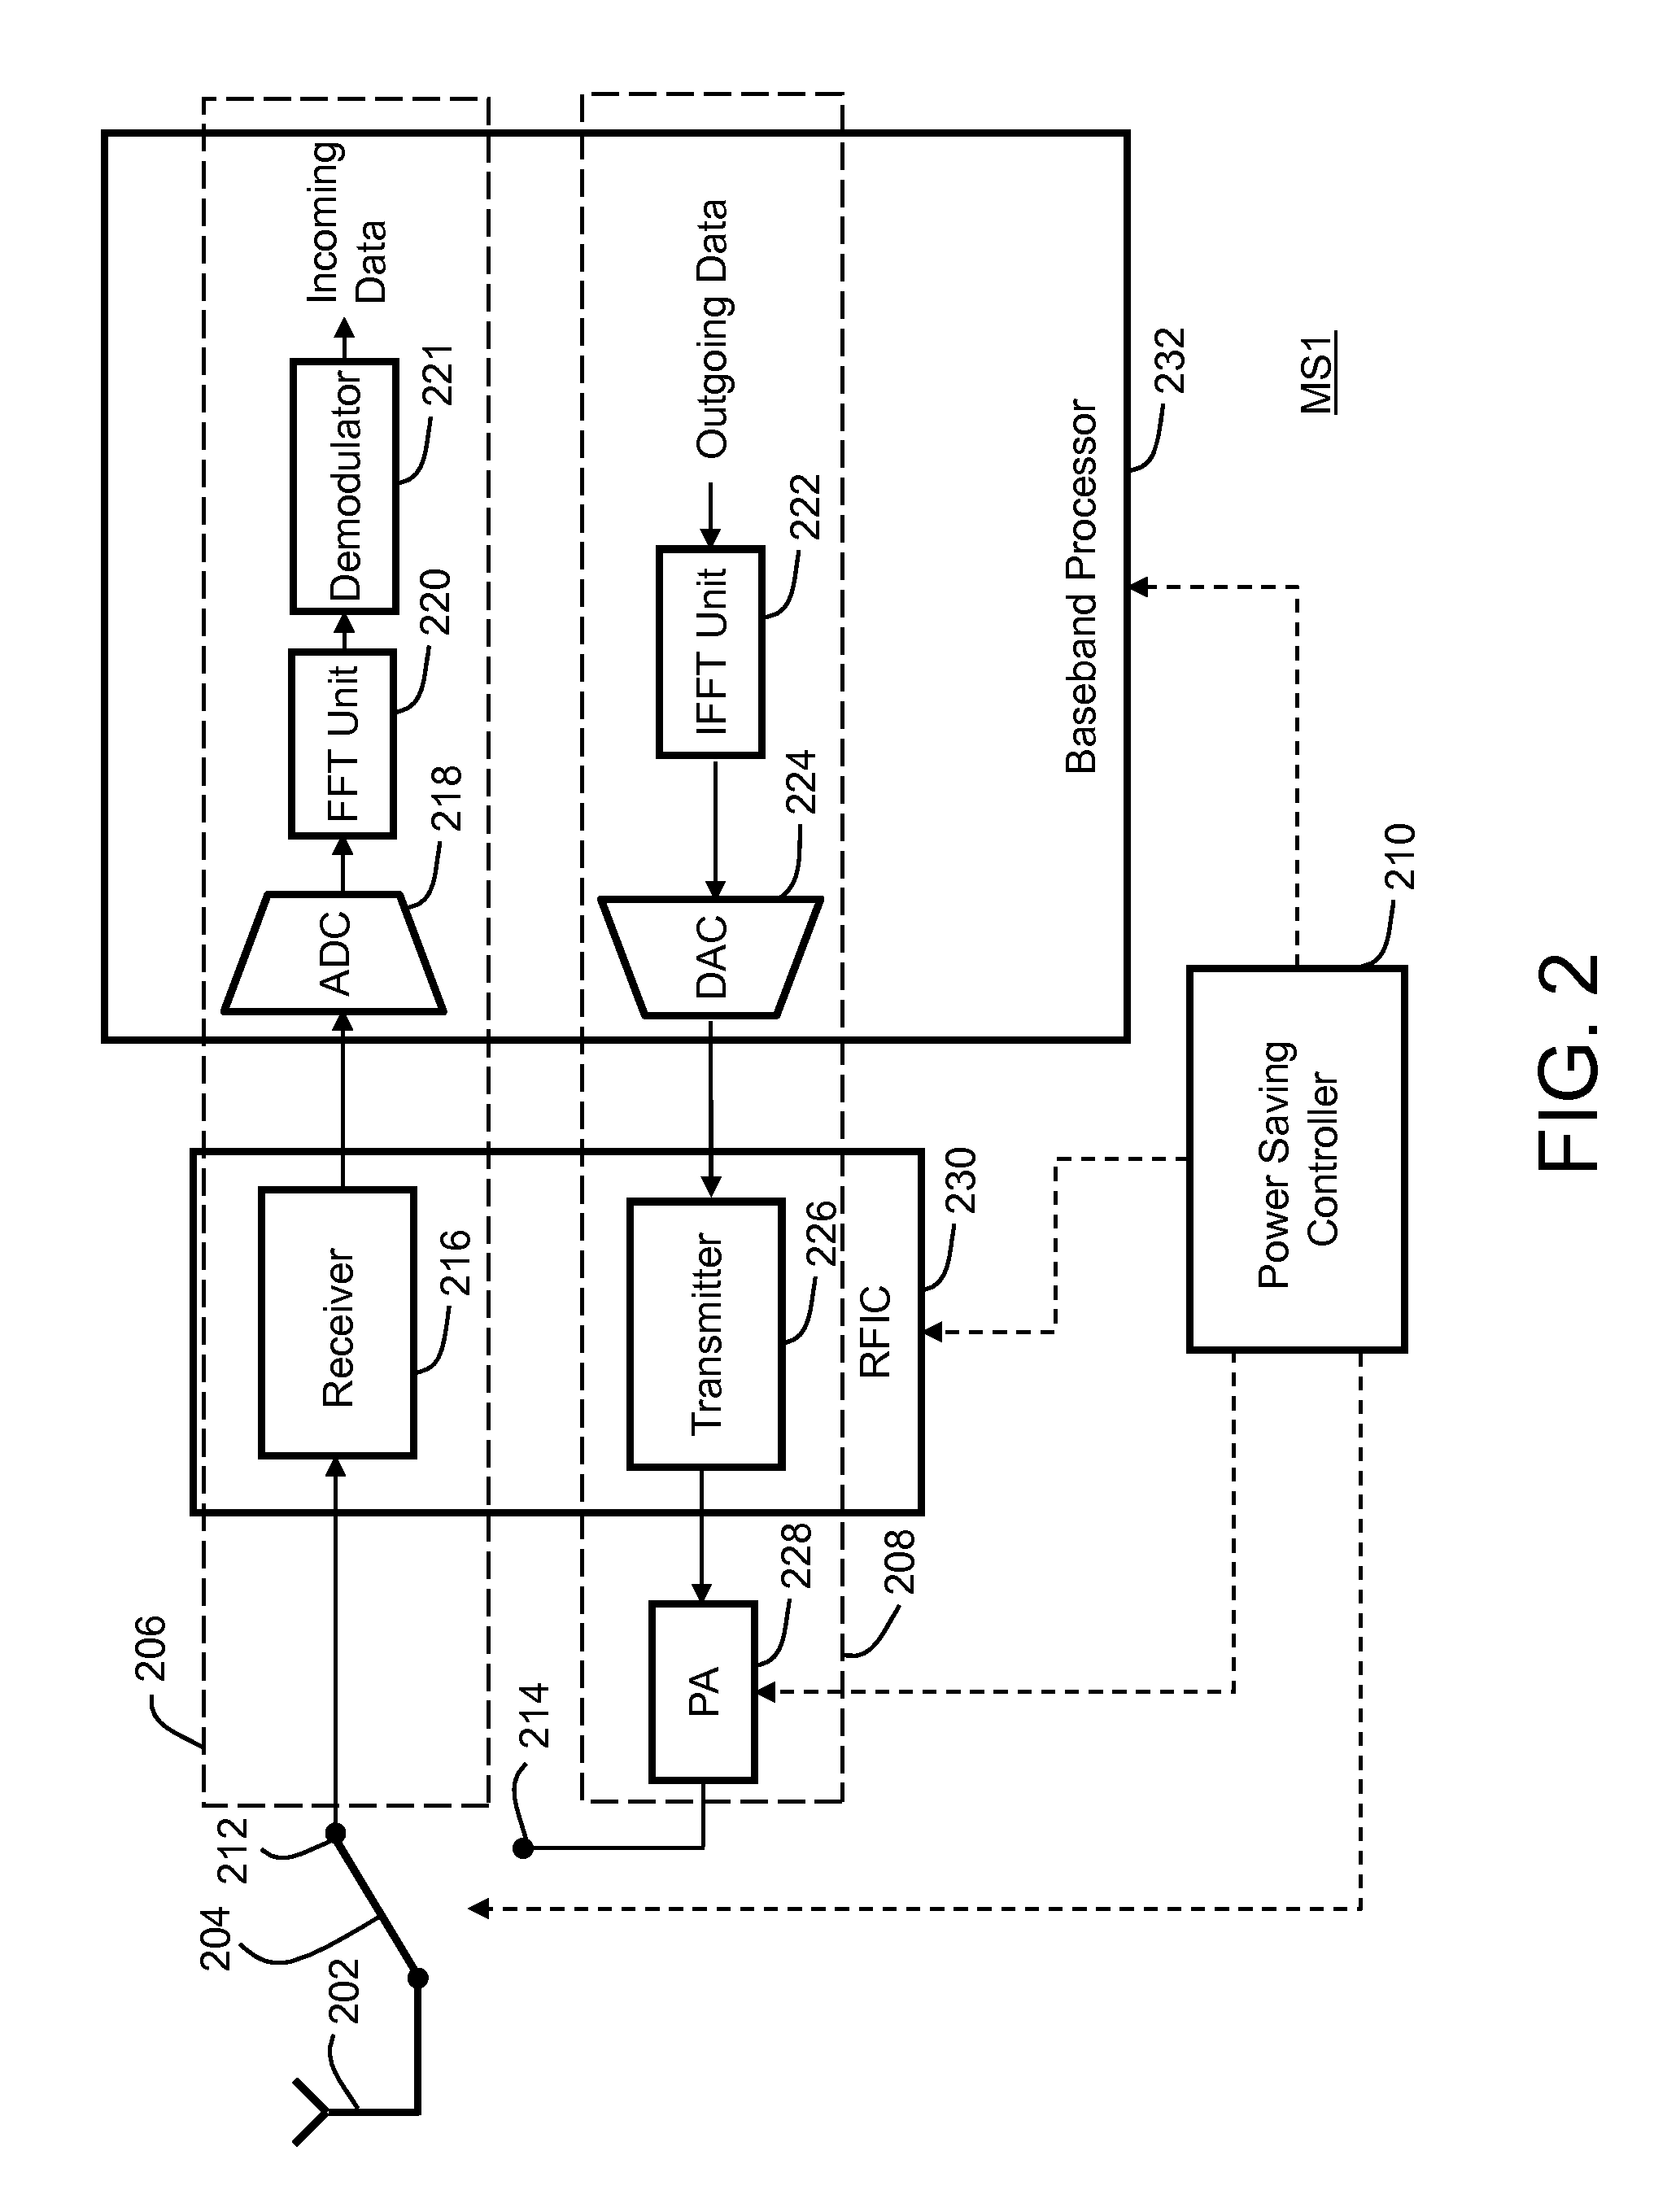 Method for reducing power consumption in a multi-user digital communication system and mobile station employing the method